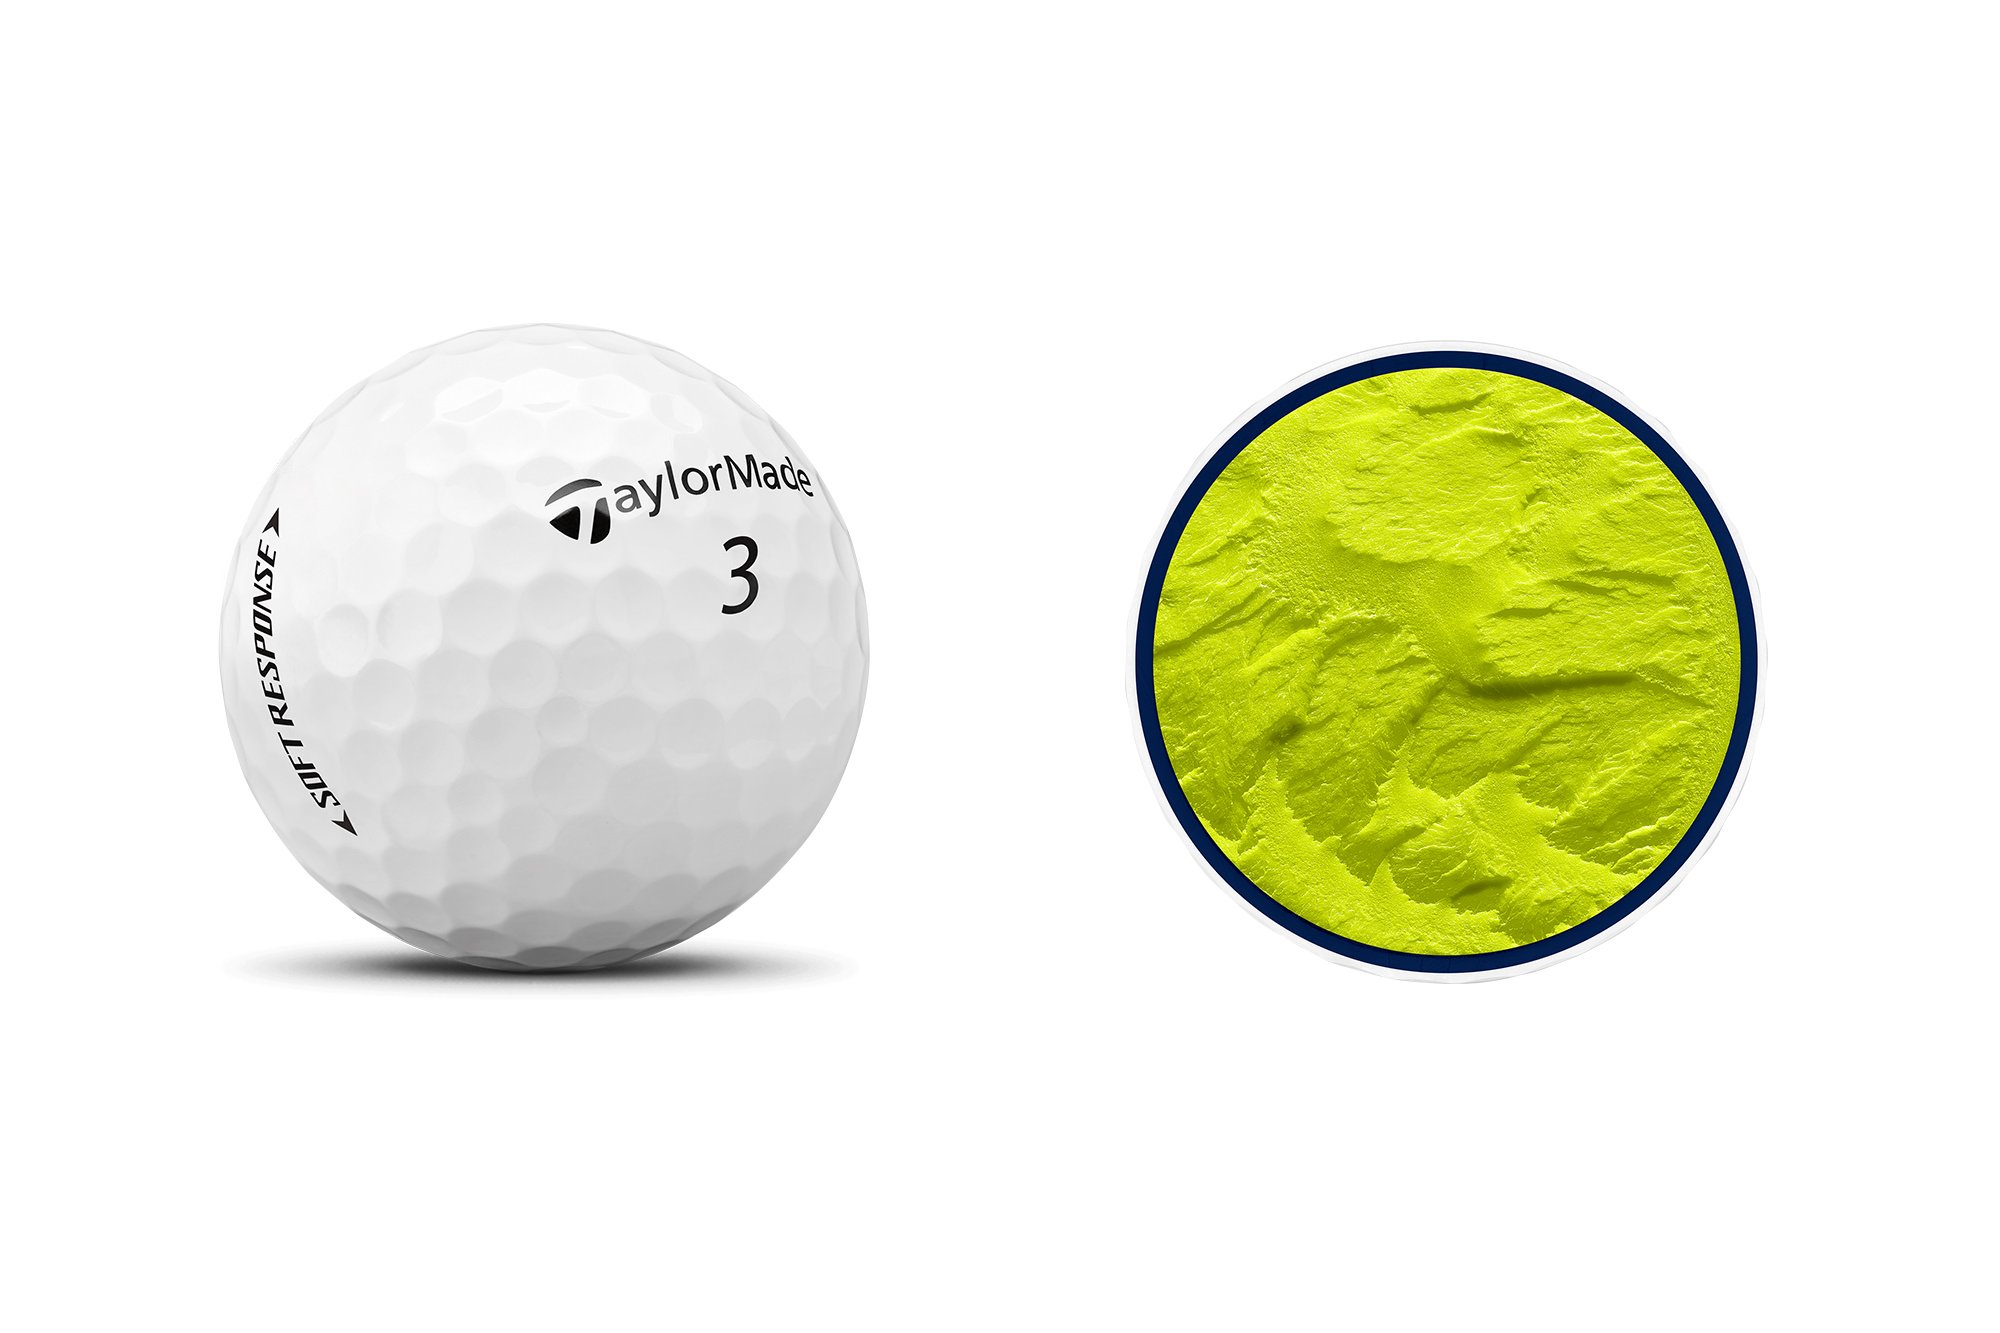 TaylorMade Soft Response golf ball review